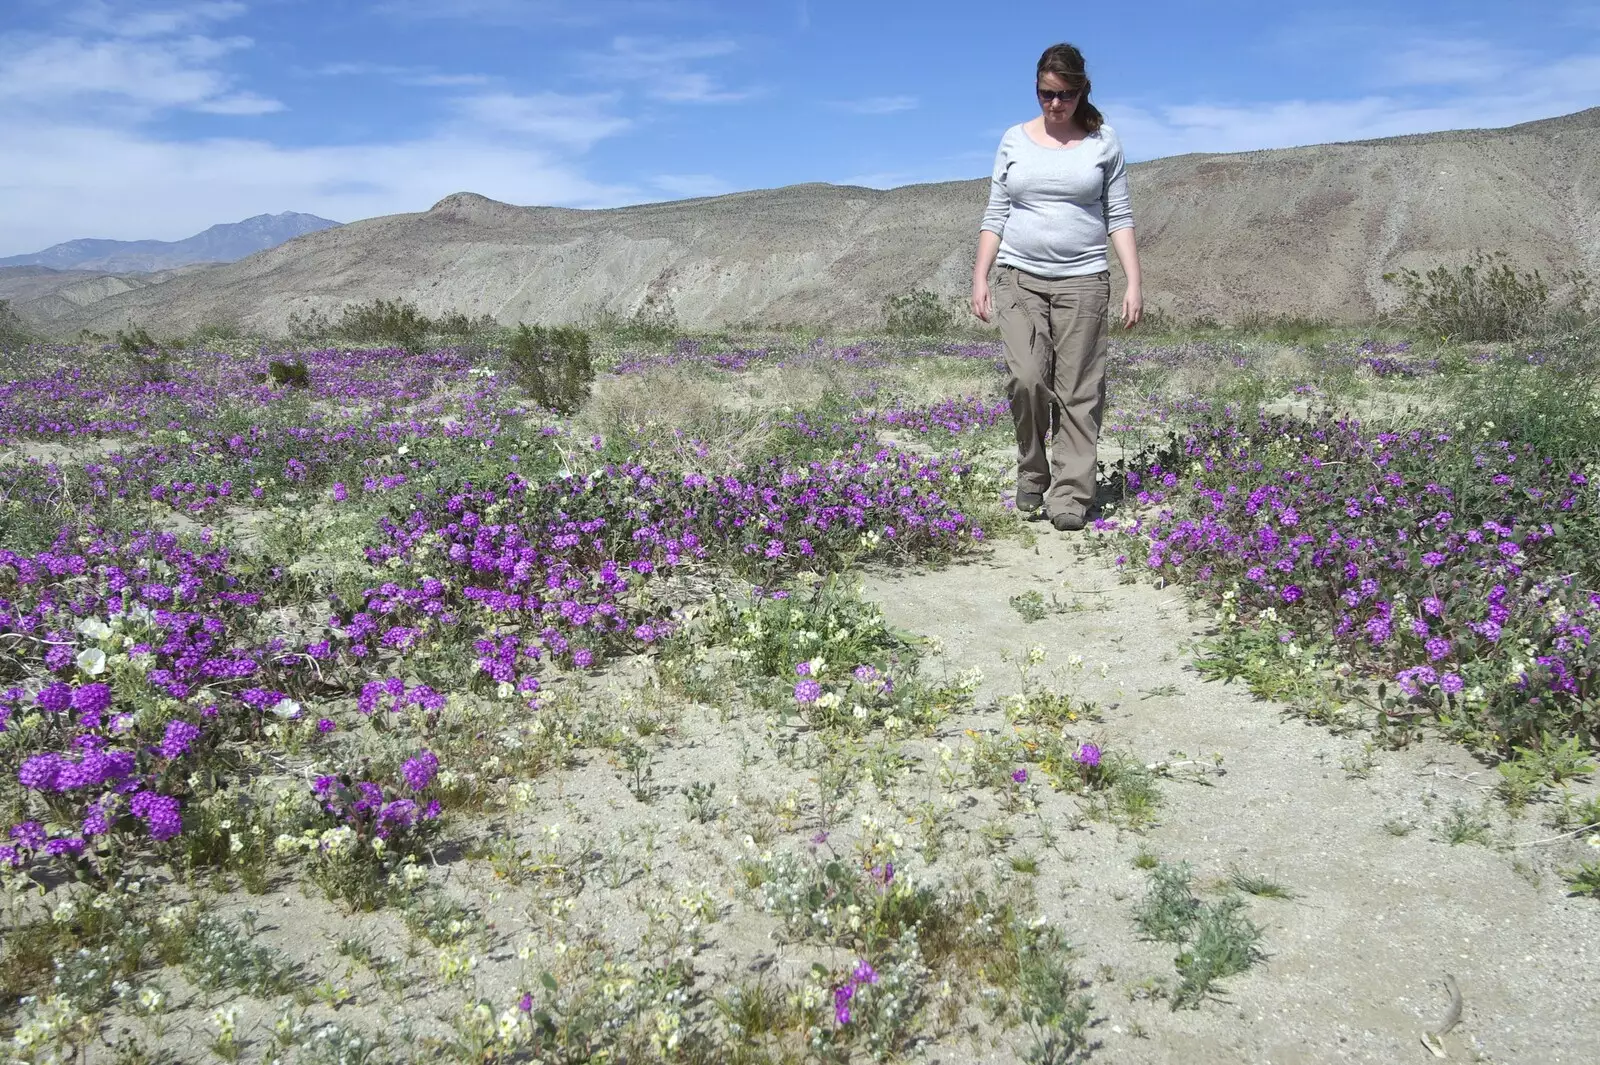 Isobel walks around amongst the purple flowers, from The End of the World: Julian to the Salton Sea and Back, California, US - 1st March 2008